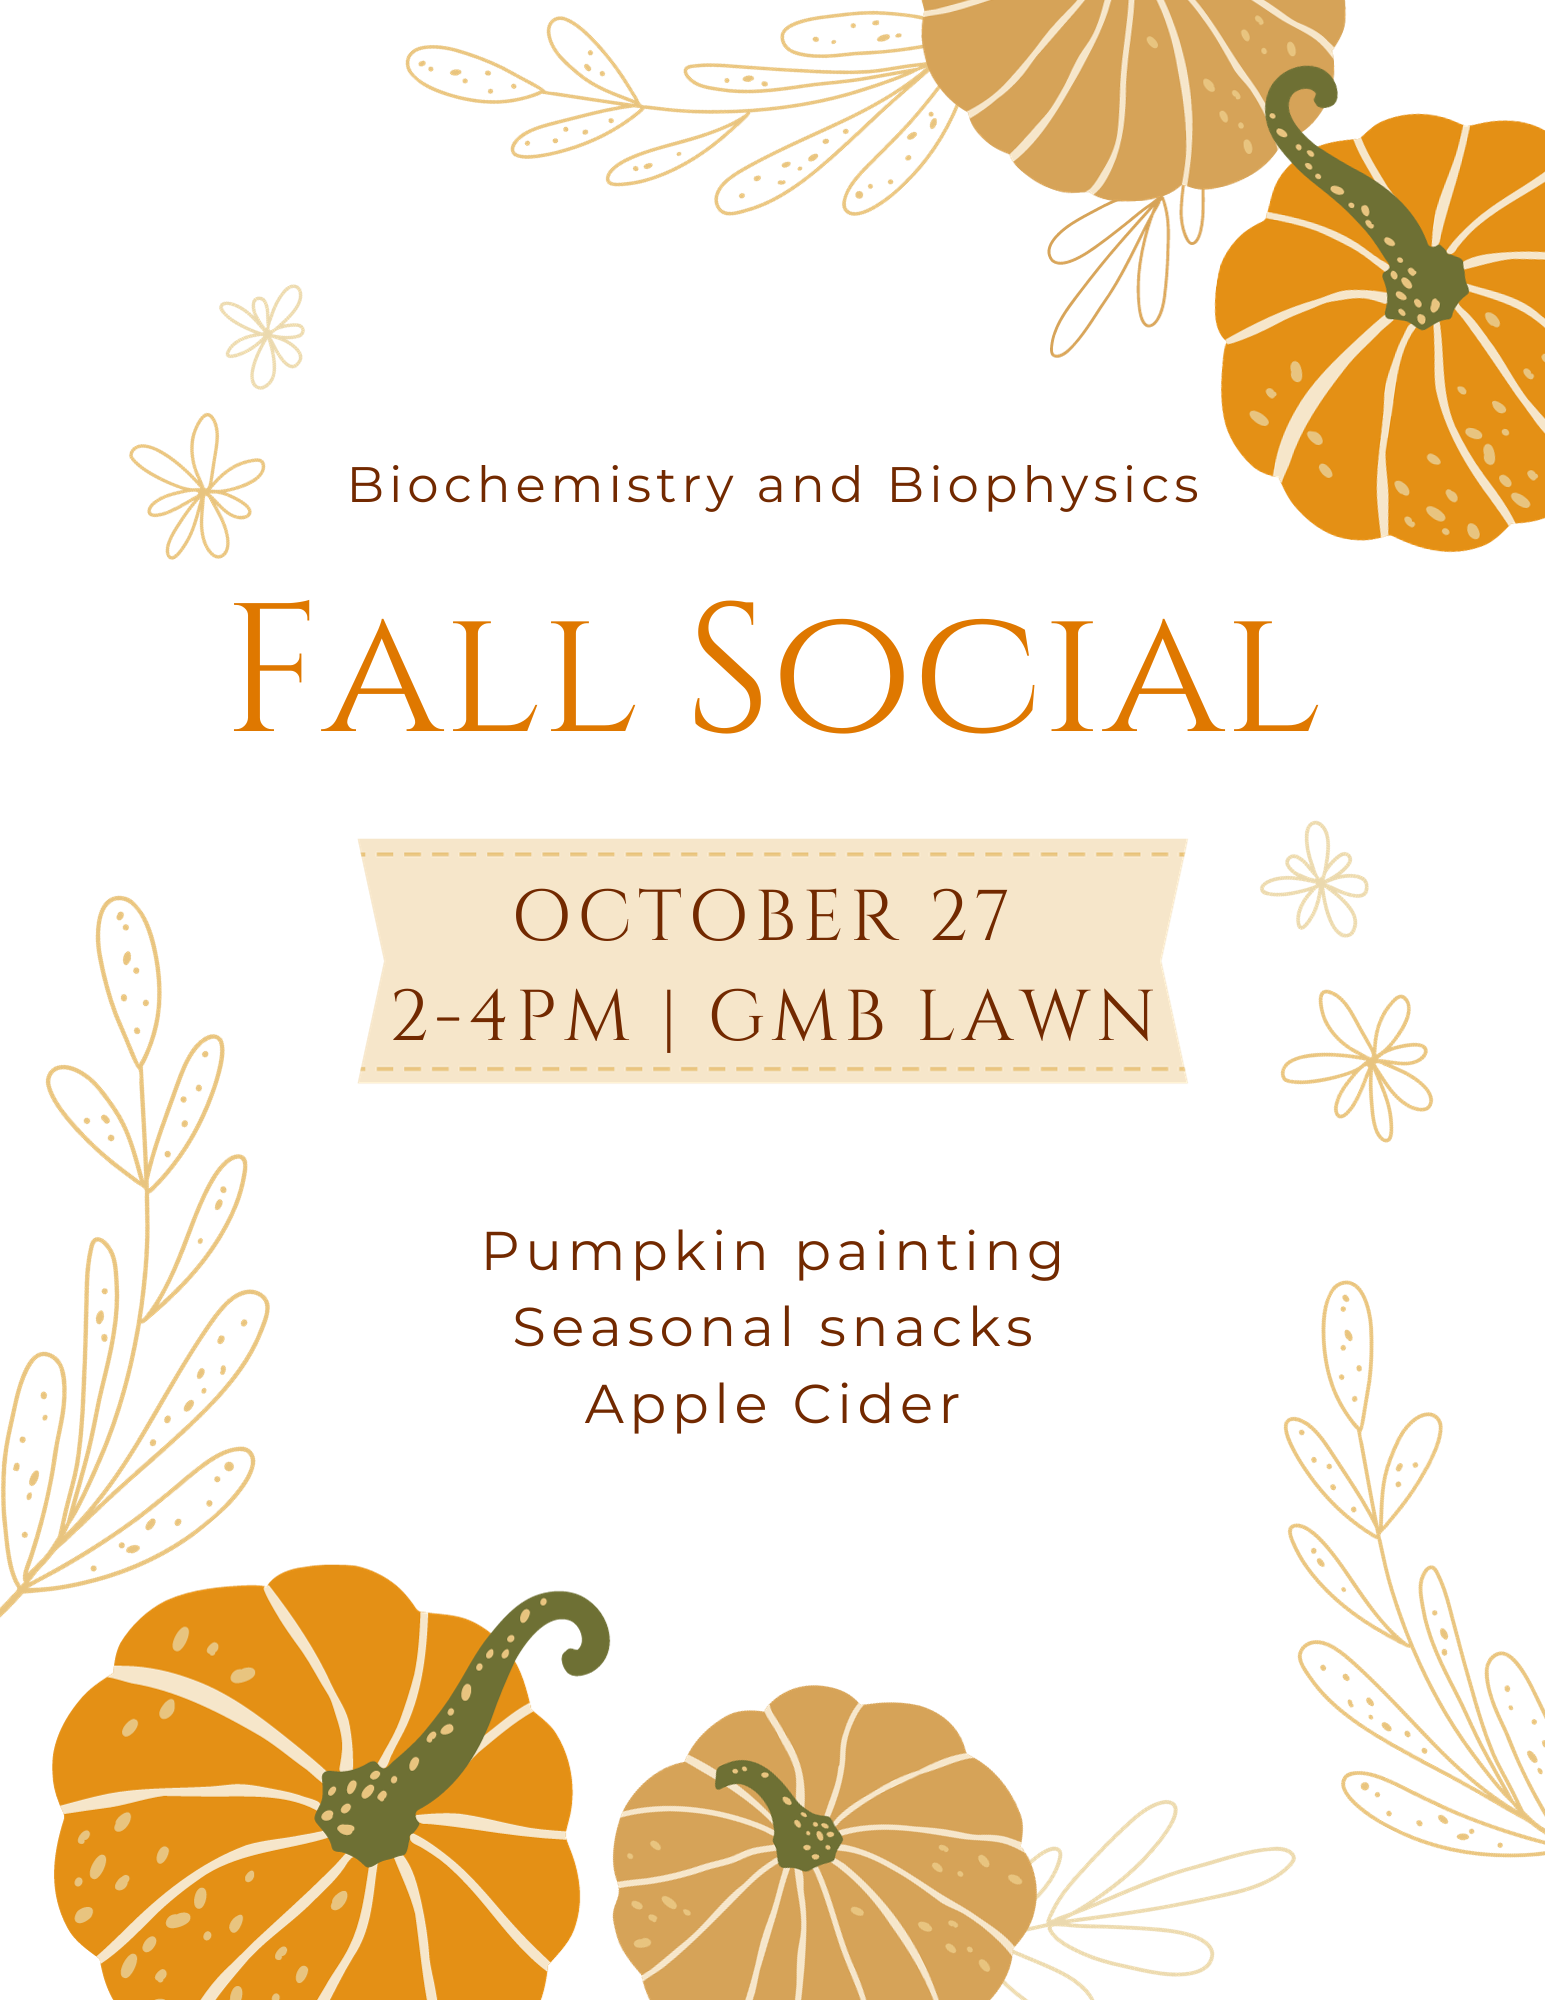 we will hold a fall social on Friday October 27 from 2 to 4 out on the genetic medicine lawn